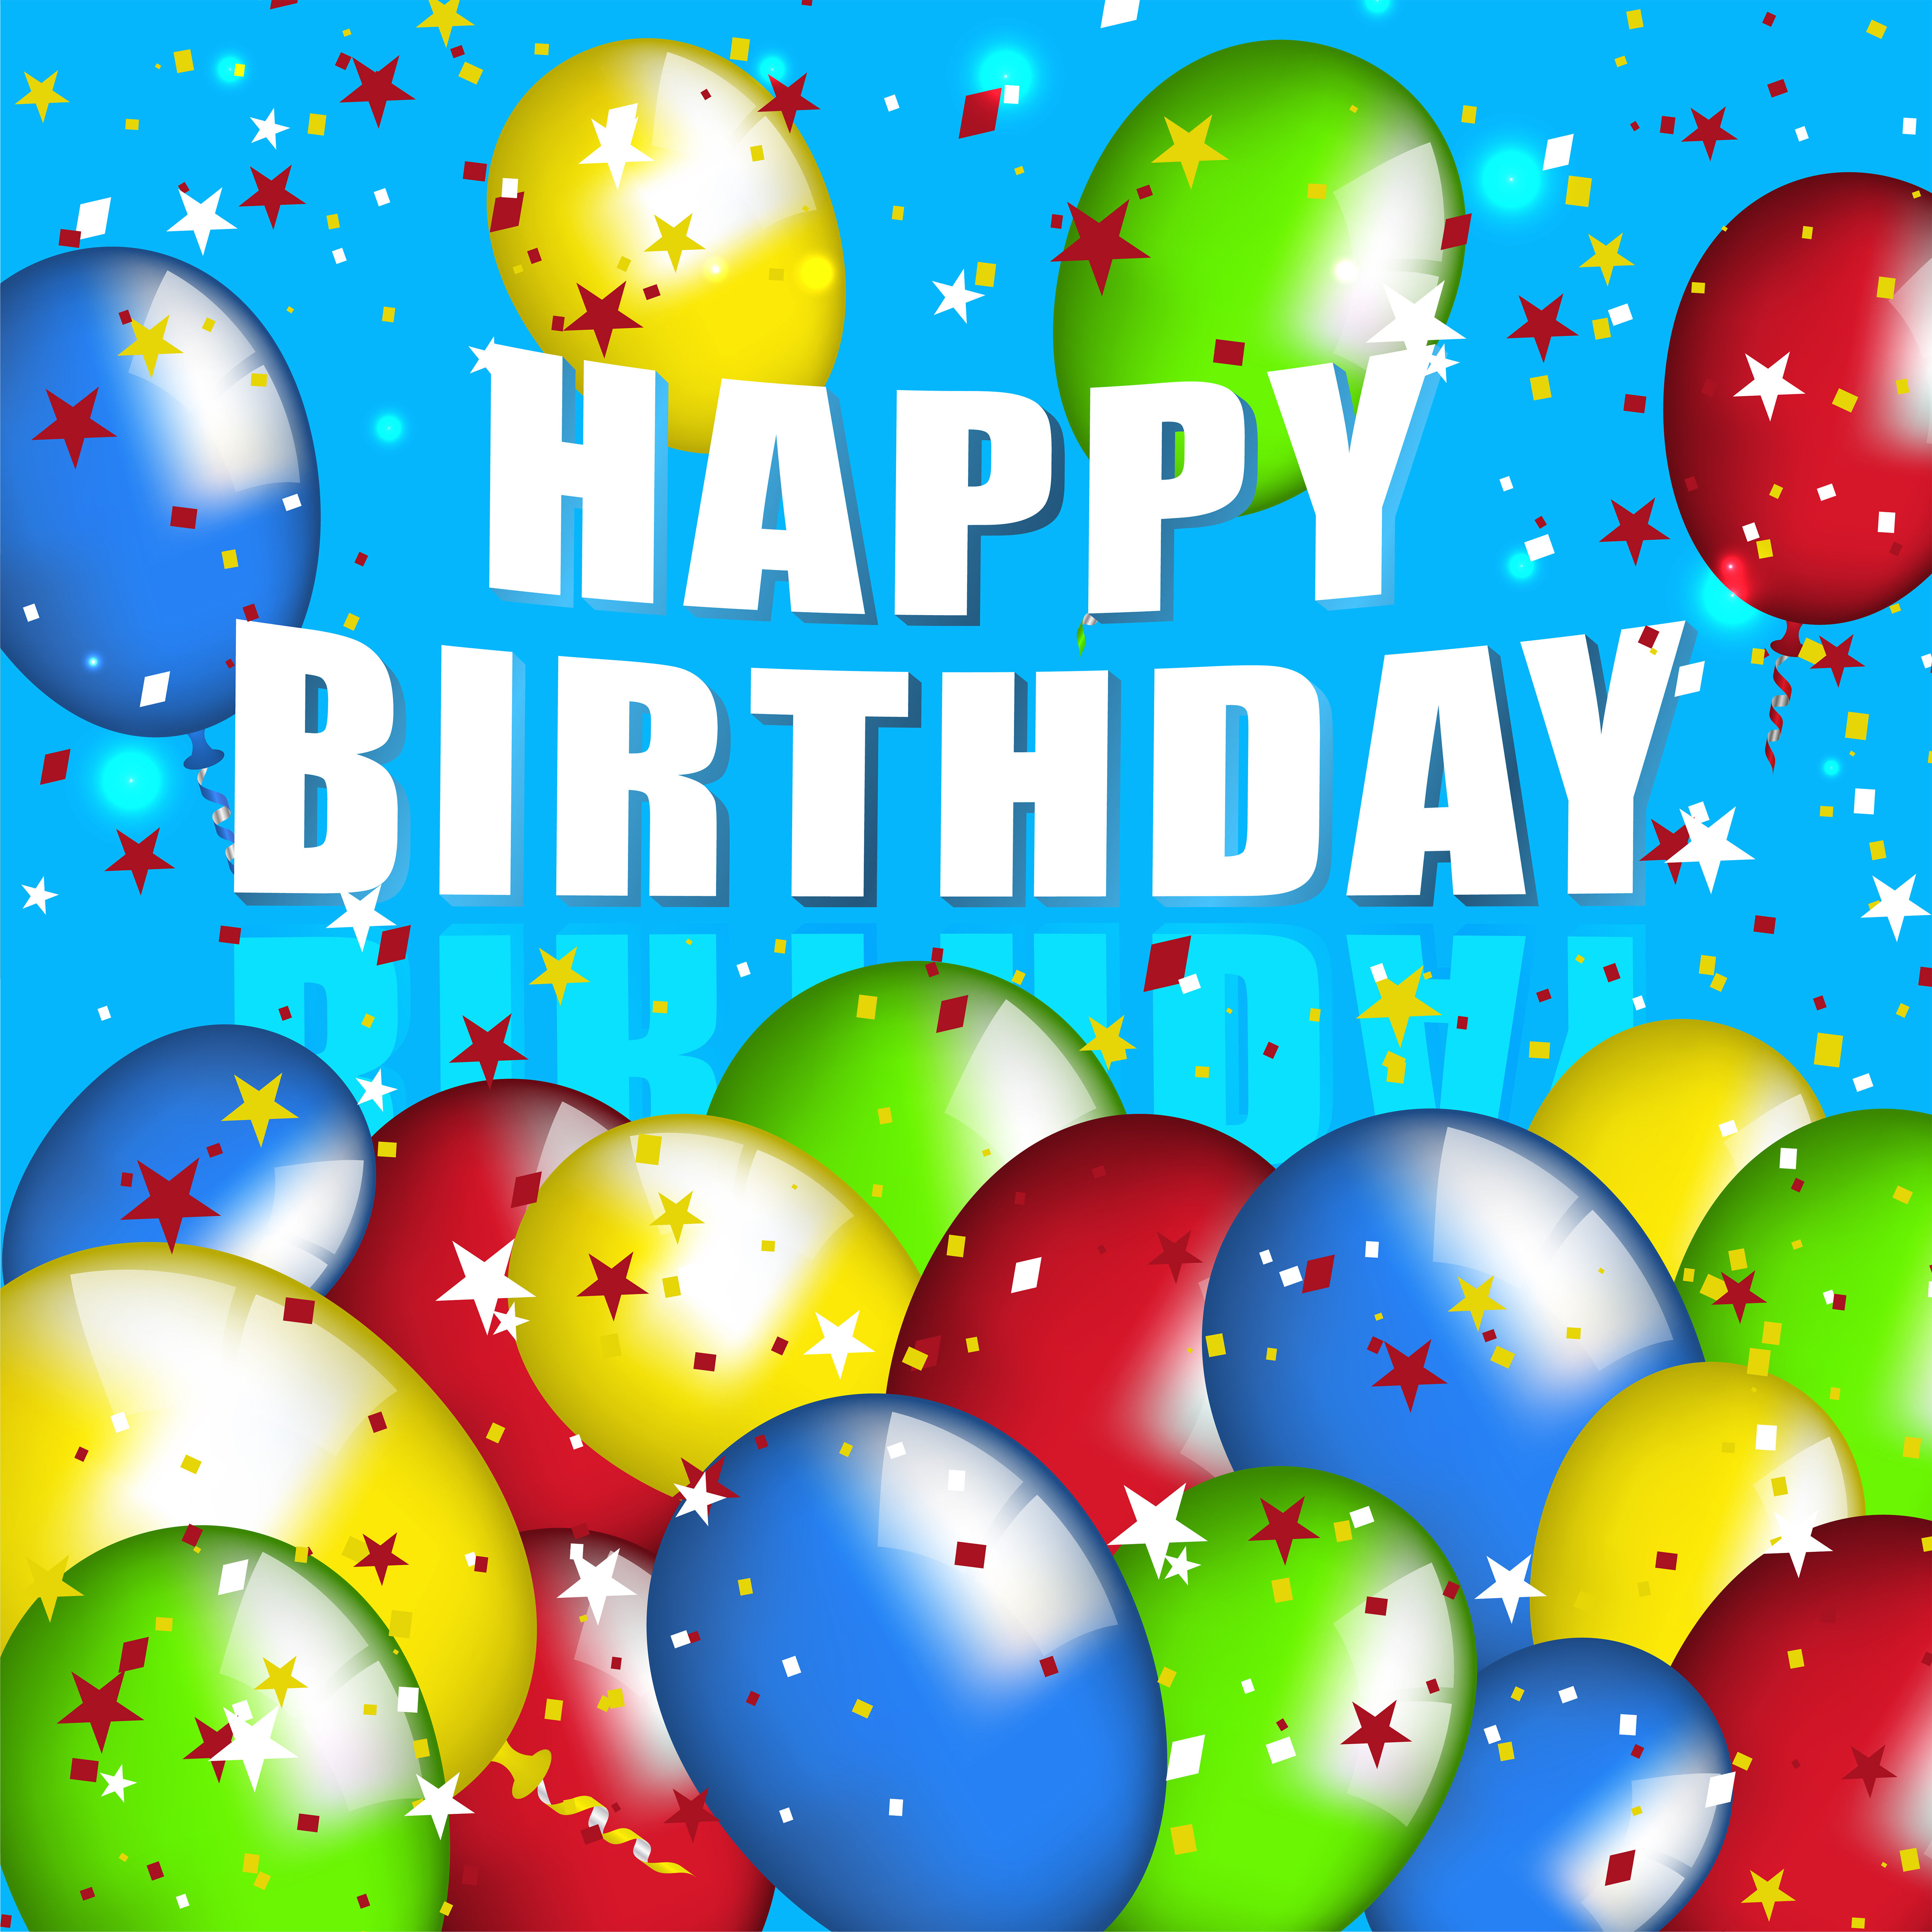 Happy Birthday Background Blue with Balloons | Gallery Yopriceville ...